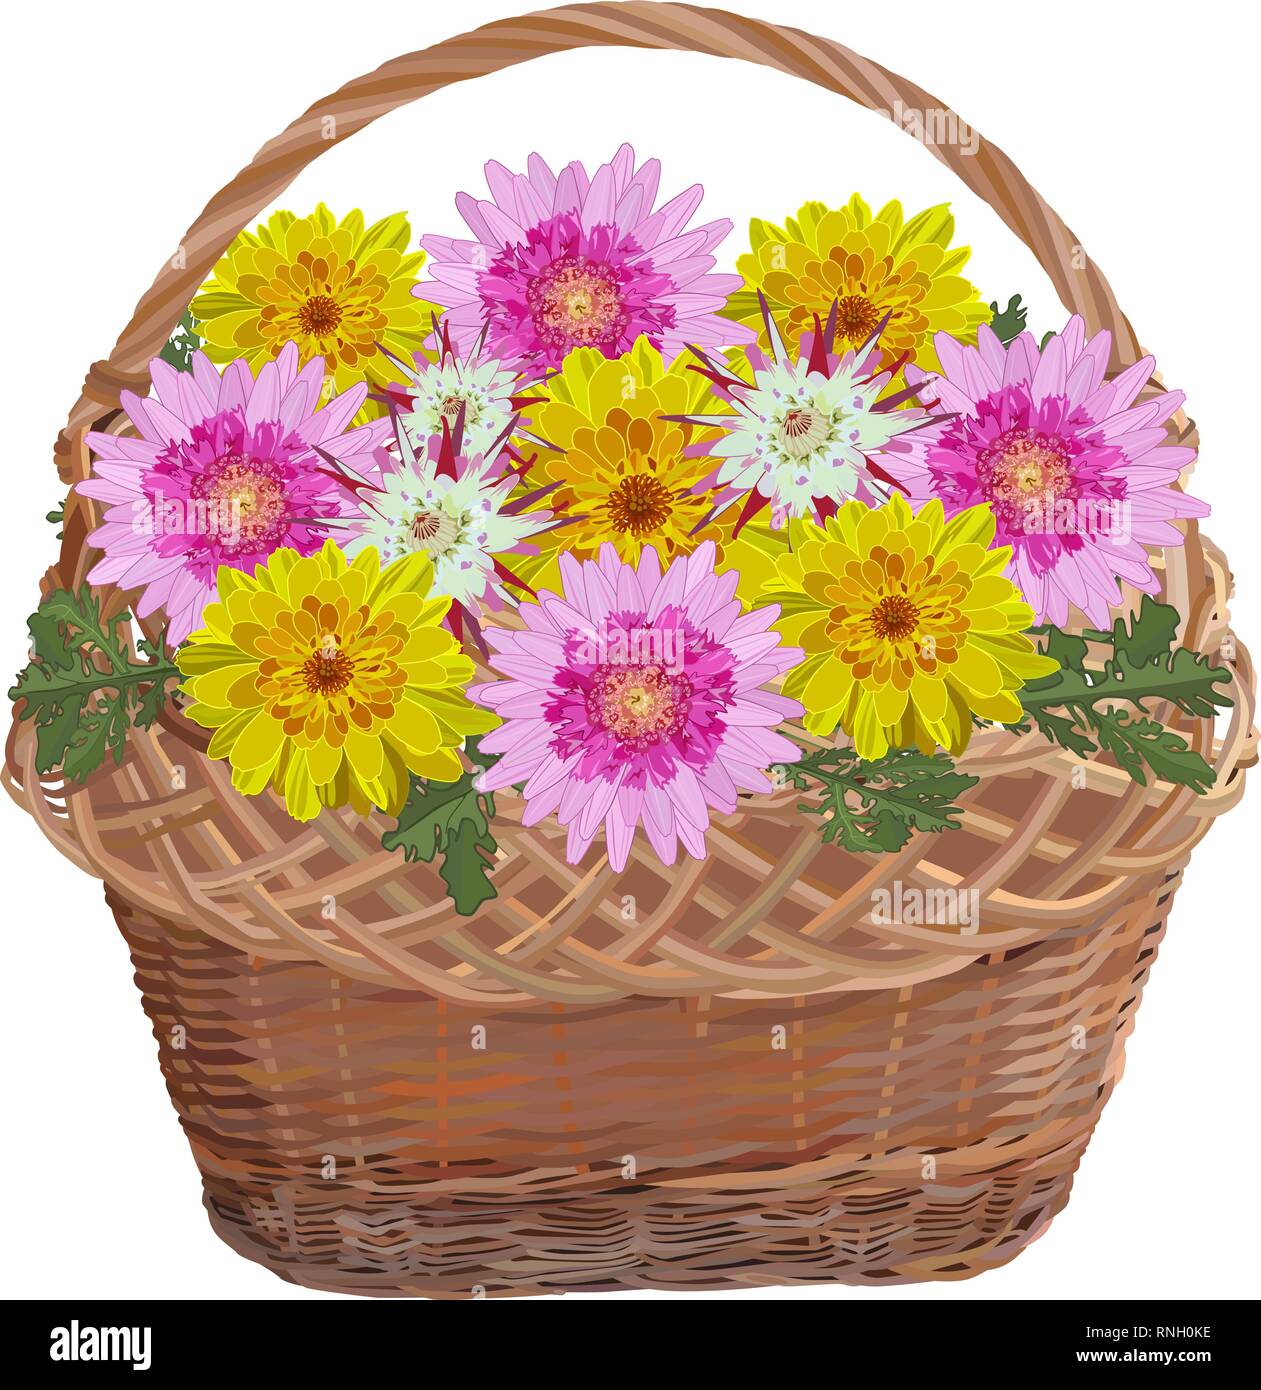 Wicker basket with chrysanthemum flowers. Vector flat illustration isolated on white background. Stock Vector